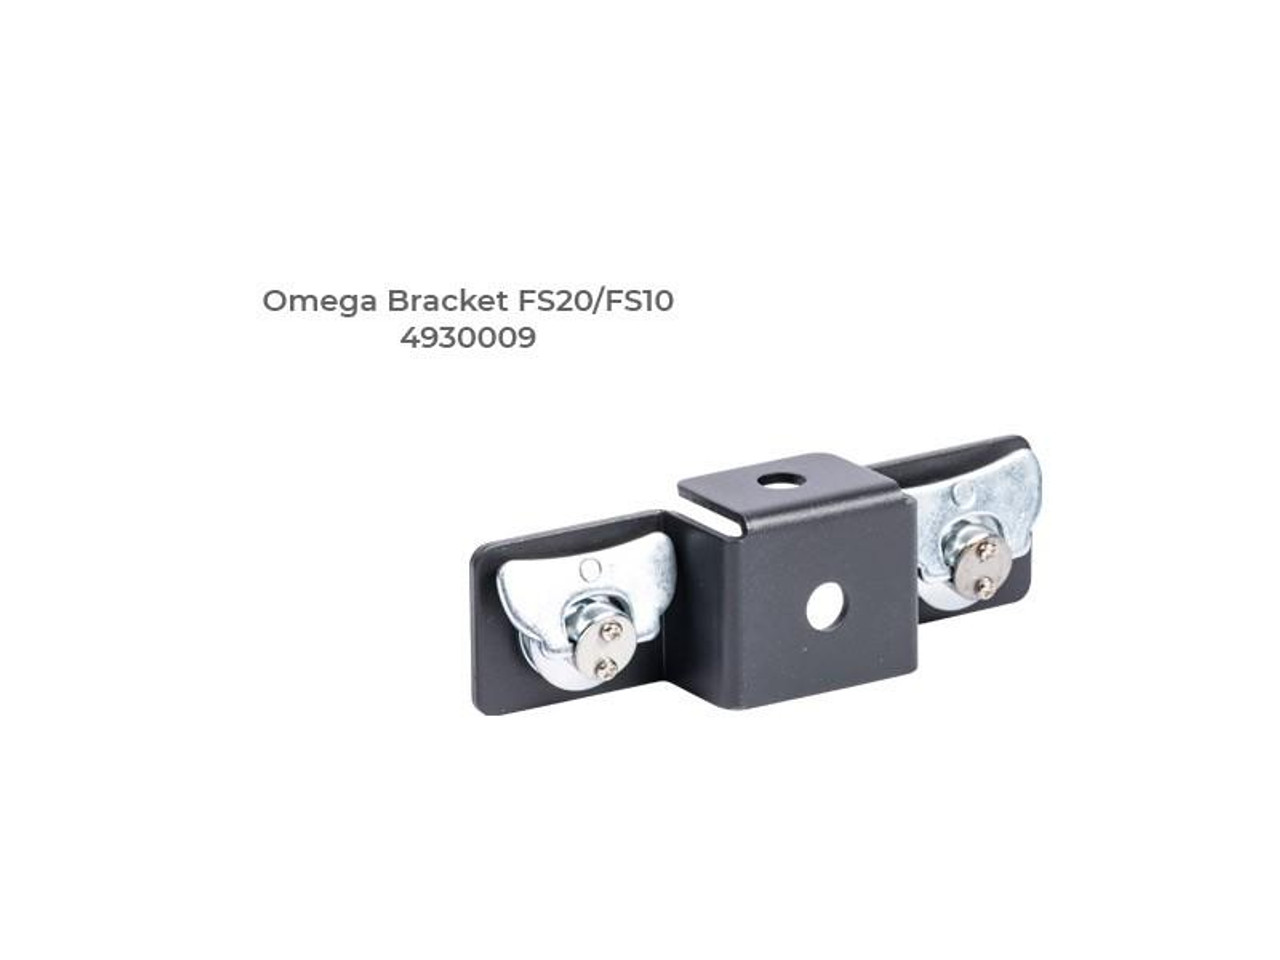 German Light Products Fusion 4930009 Omega Bracket for FS10 or FS20 (4930009)